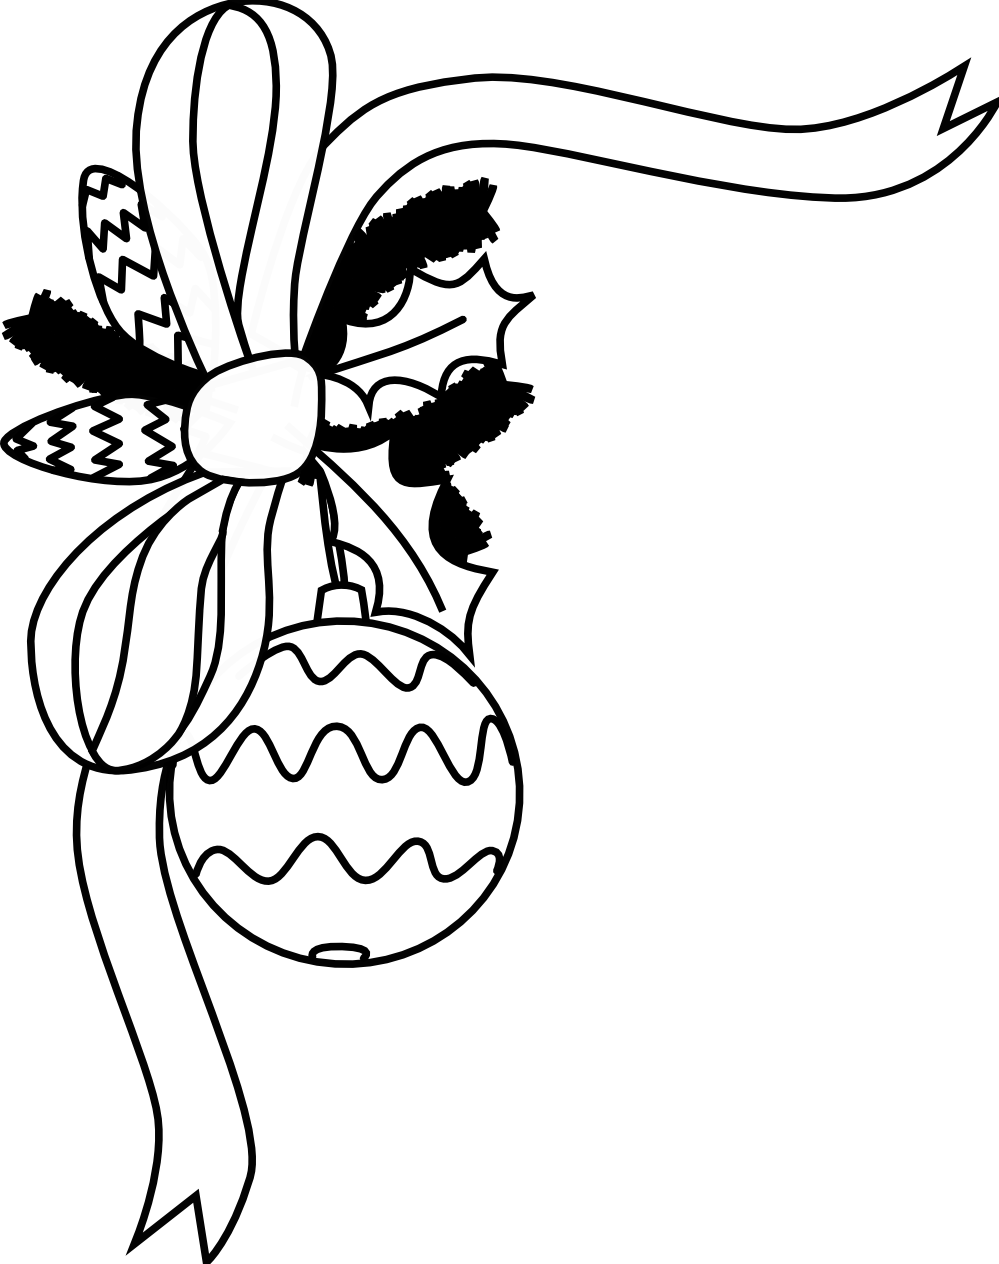 Florida clipart christmas. Ornament black and white